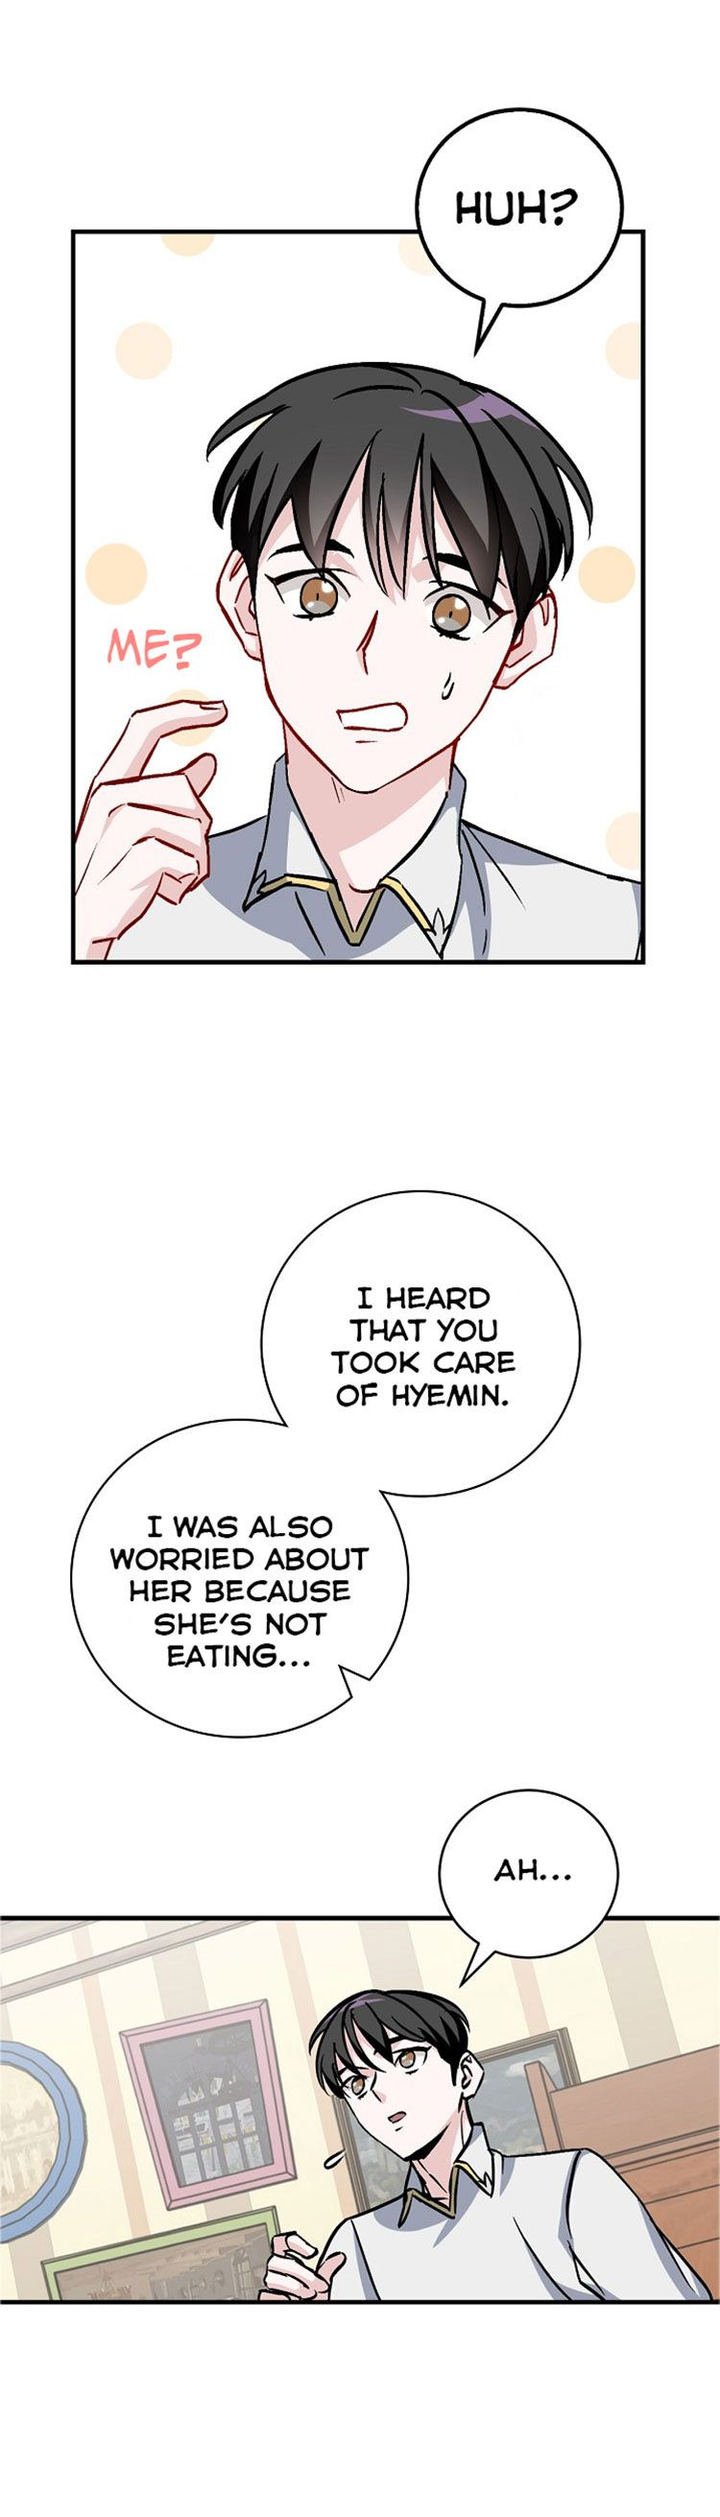 leveling-up-by-only-eating-chap-35-1